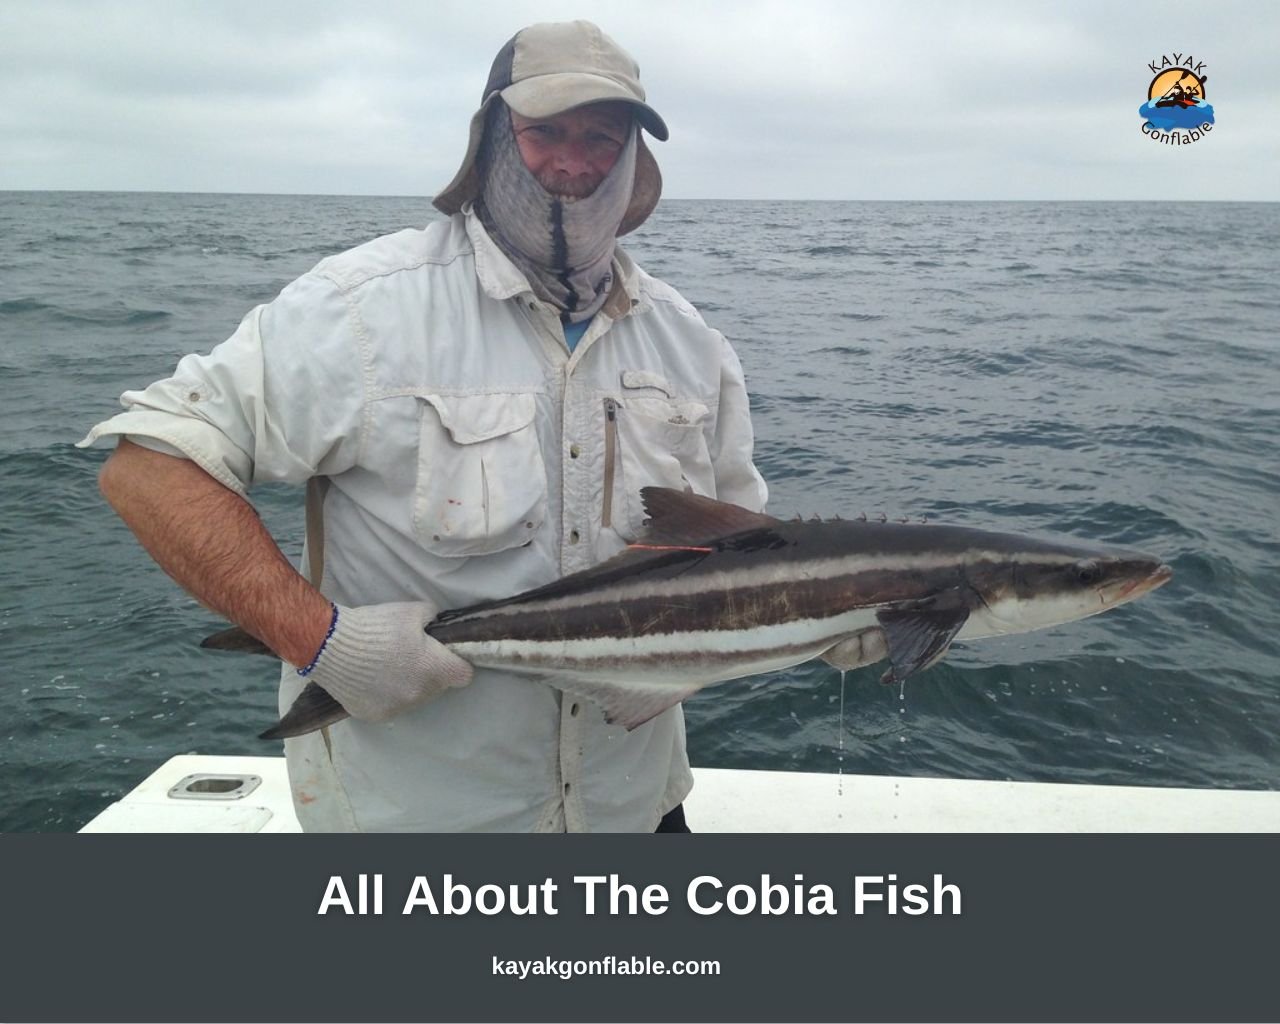 All About The Cobia Fish